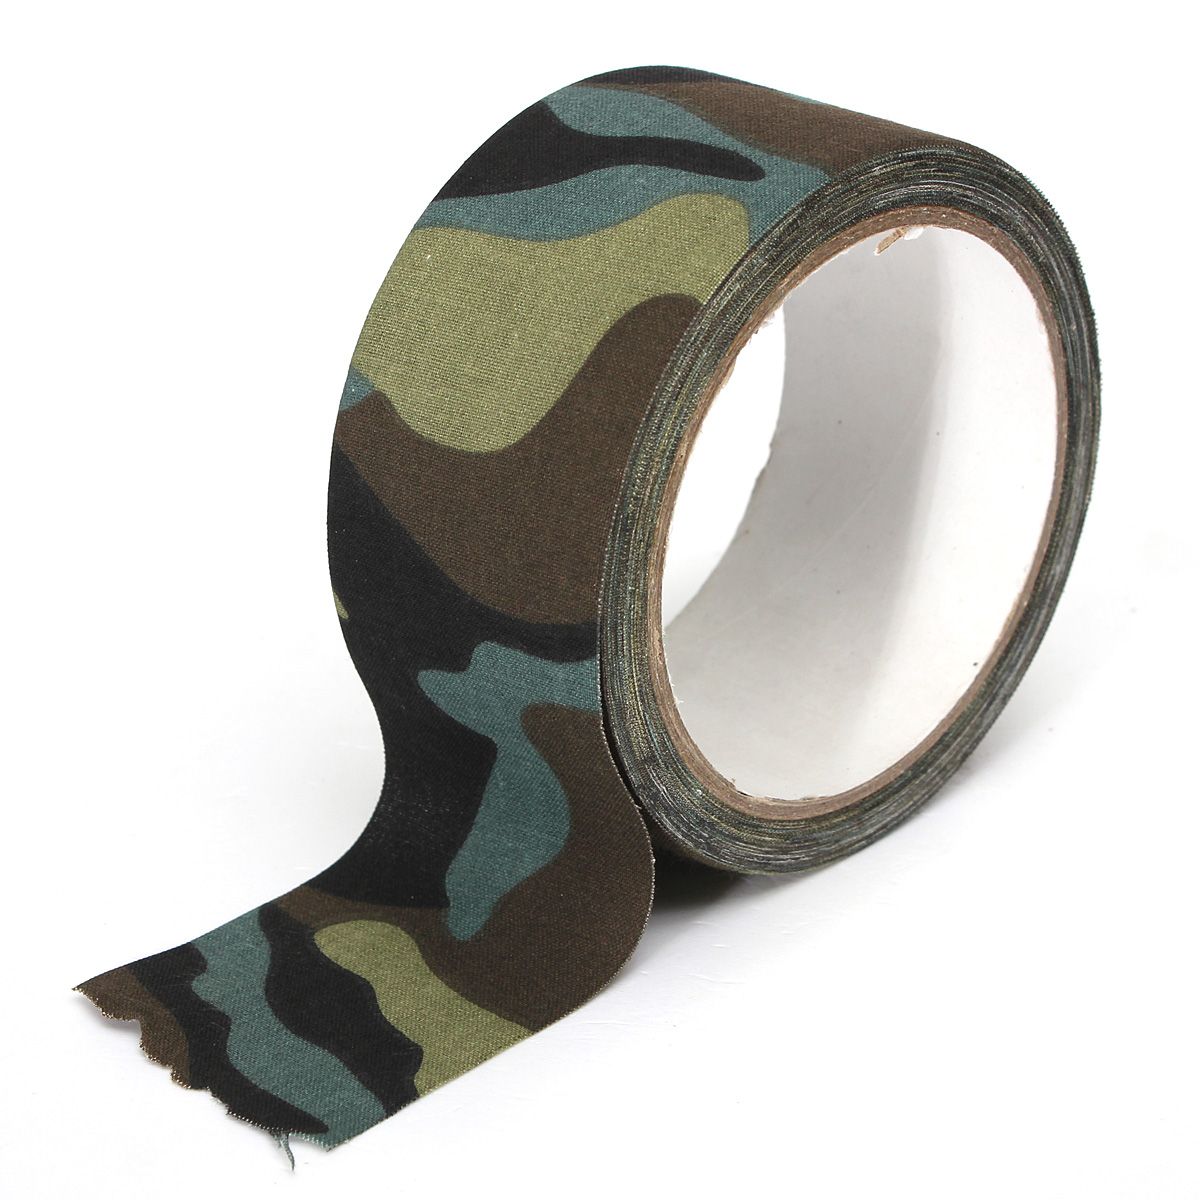 10M-Camouflage-Wrap-Tape-Camo-Tape-Duct-Waterproof-Mutifunctional-Fabric-Camping-Stealth-Tape-1310100